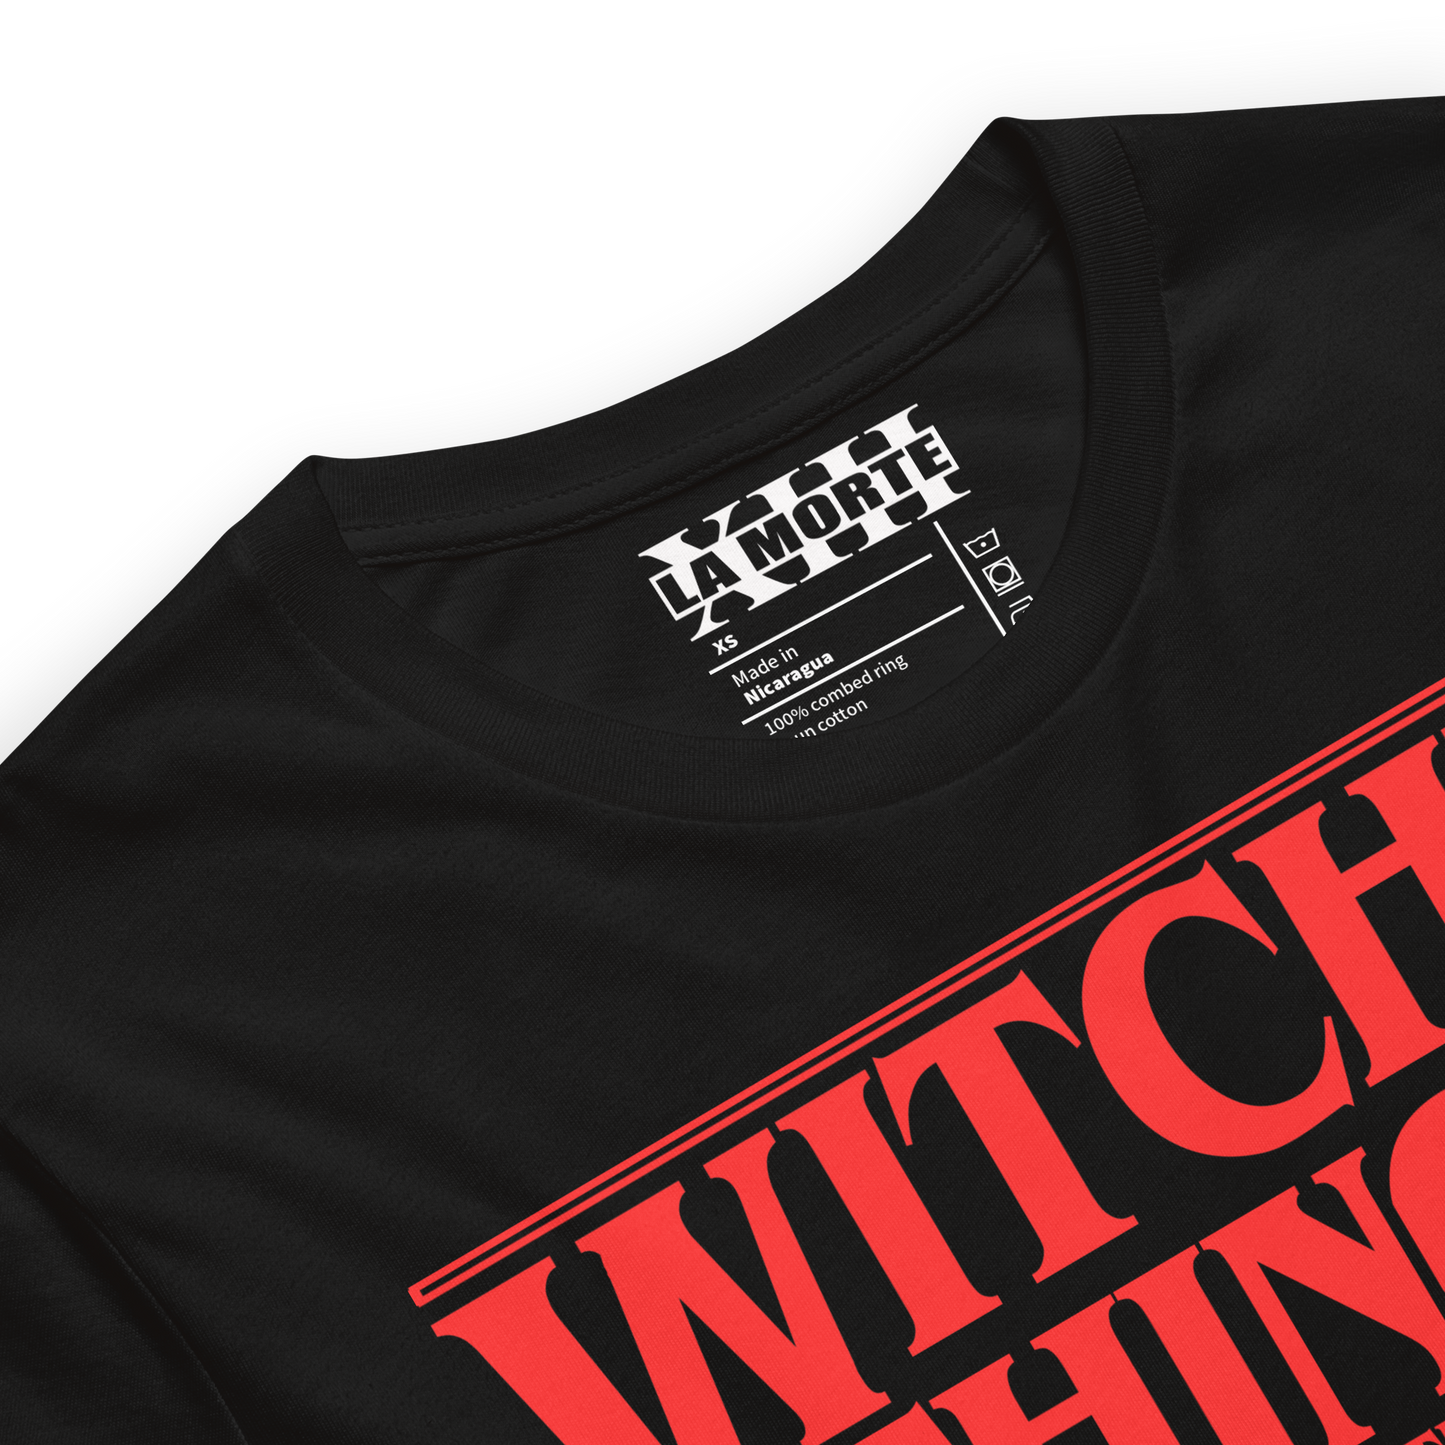 Witchy Things • Unisex T-Shirt